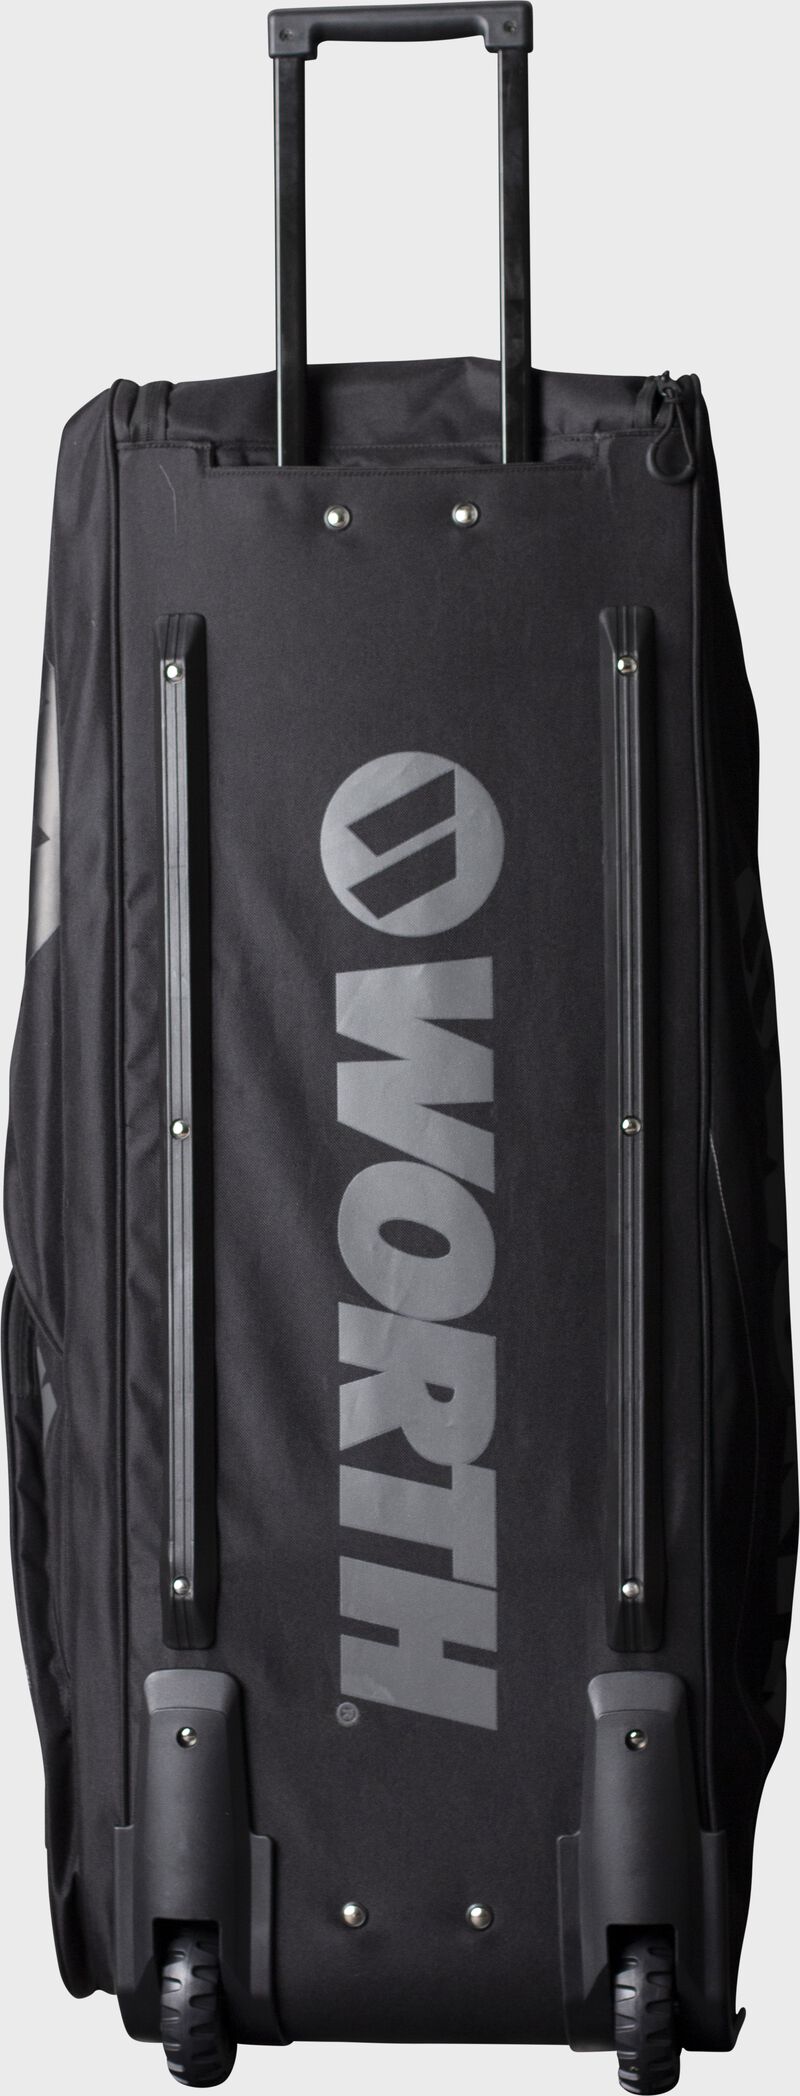 Bottom of a black wheeled softball bag with a Worth logo in the middle - SKU: WORBAG-WB-BLK